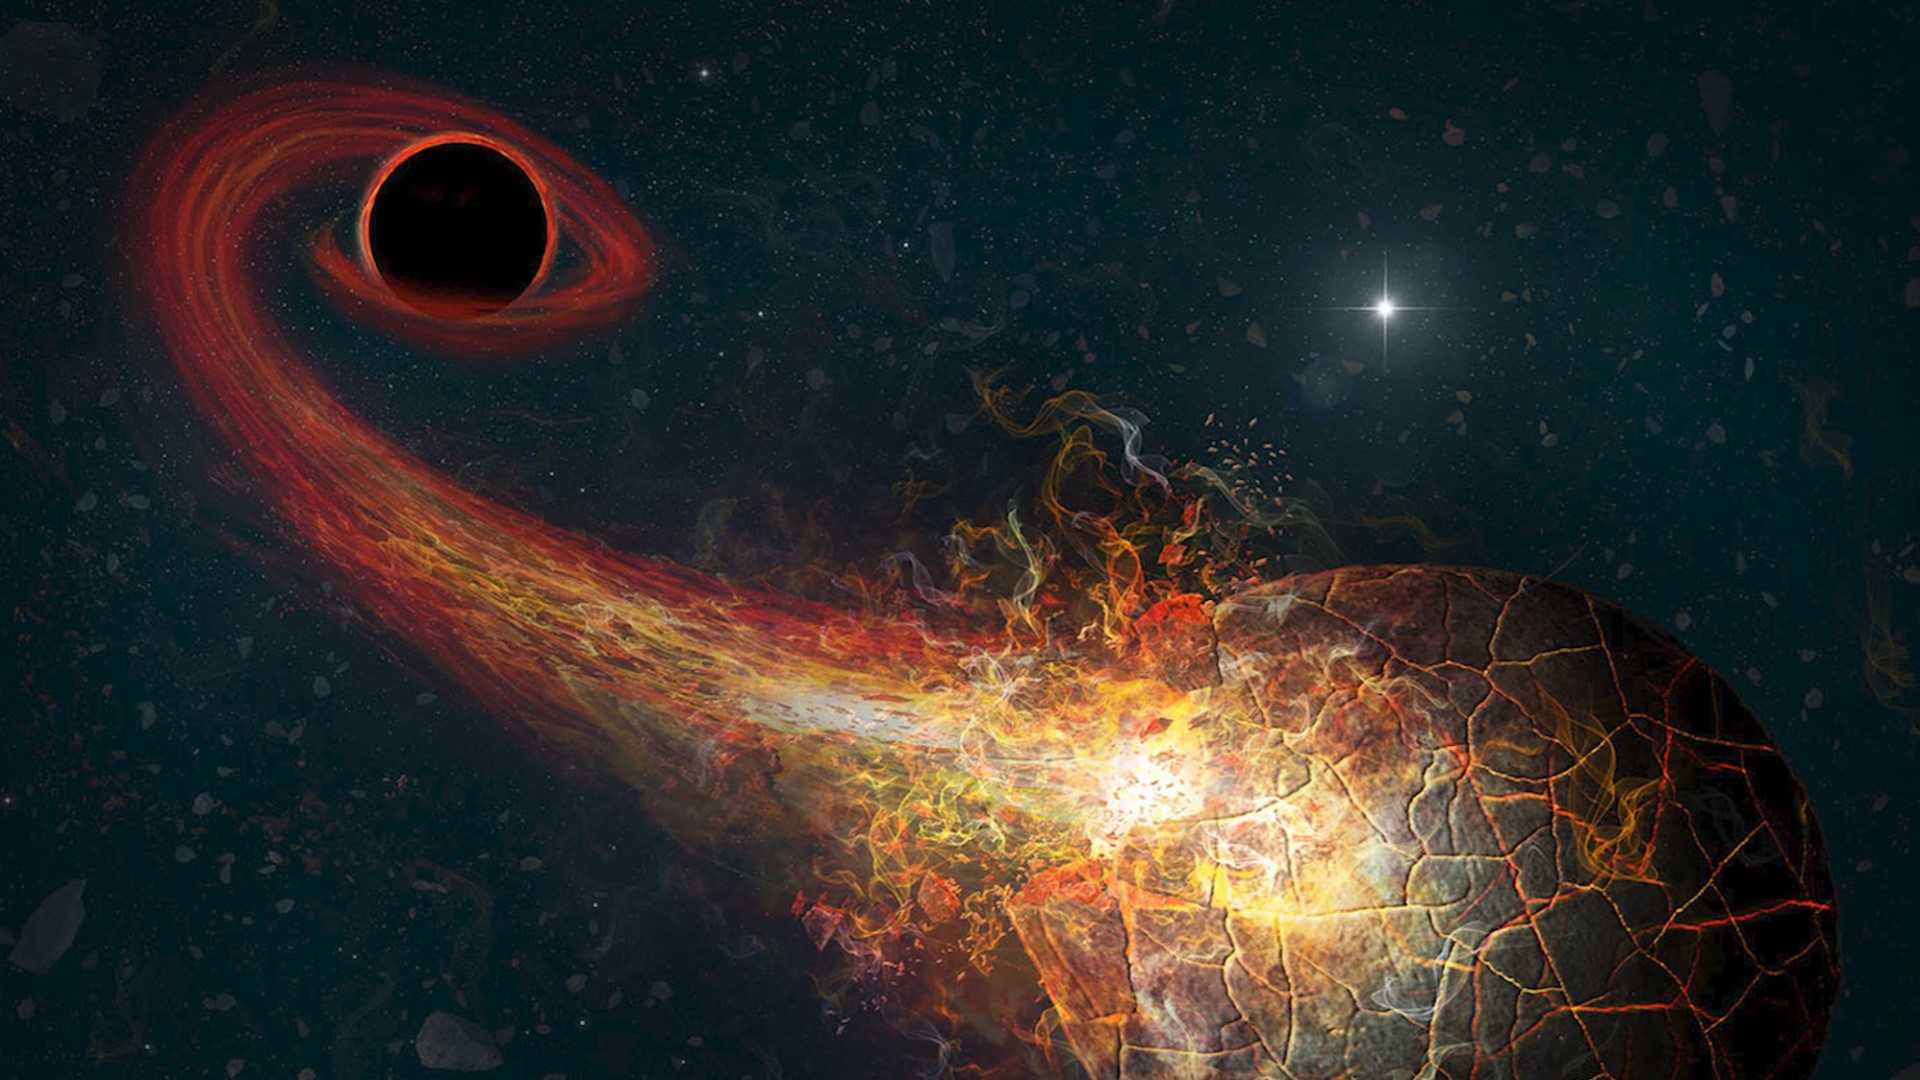 Researchers at Harvard University and the Black Hole Initiative have developed a new method to determine once and for all if the hypothesized 'Planet 9' at the edge of our solar system is an undiscovered world or a primordial black hole.